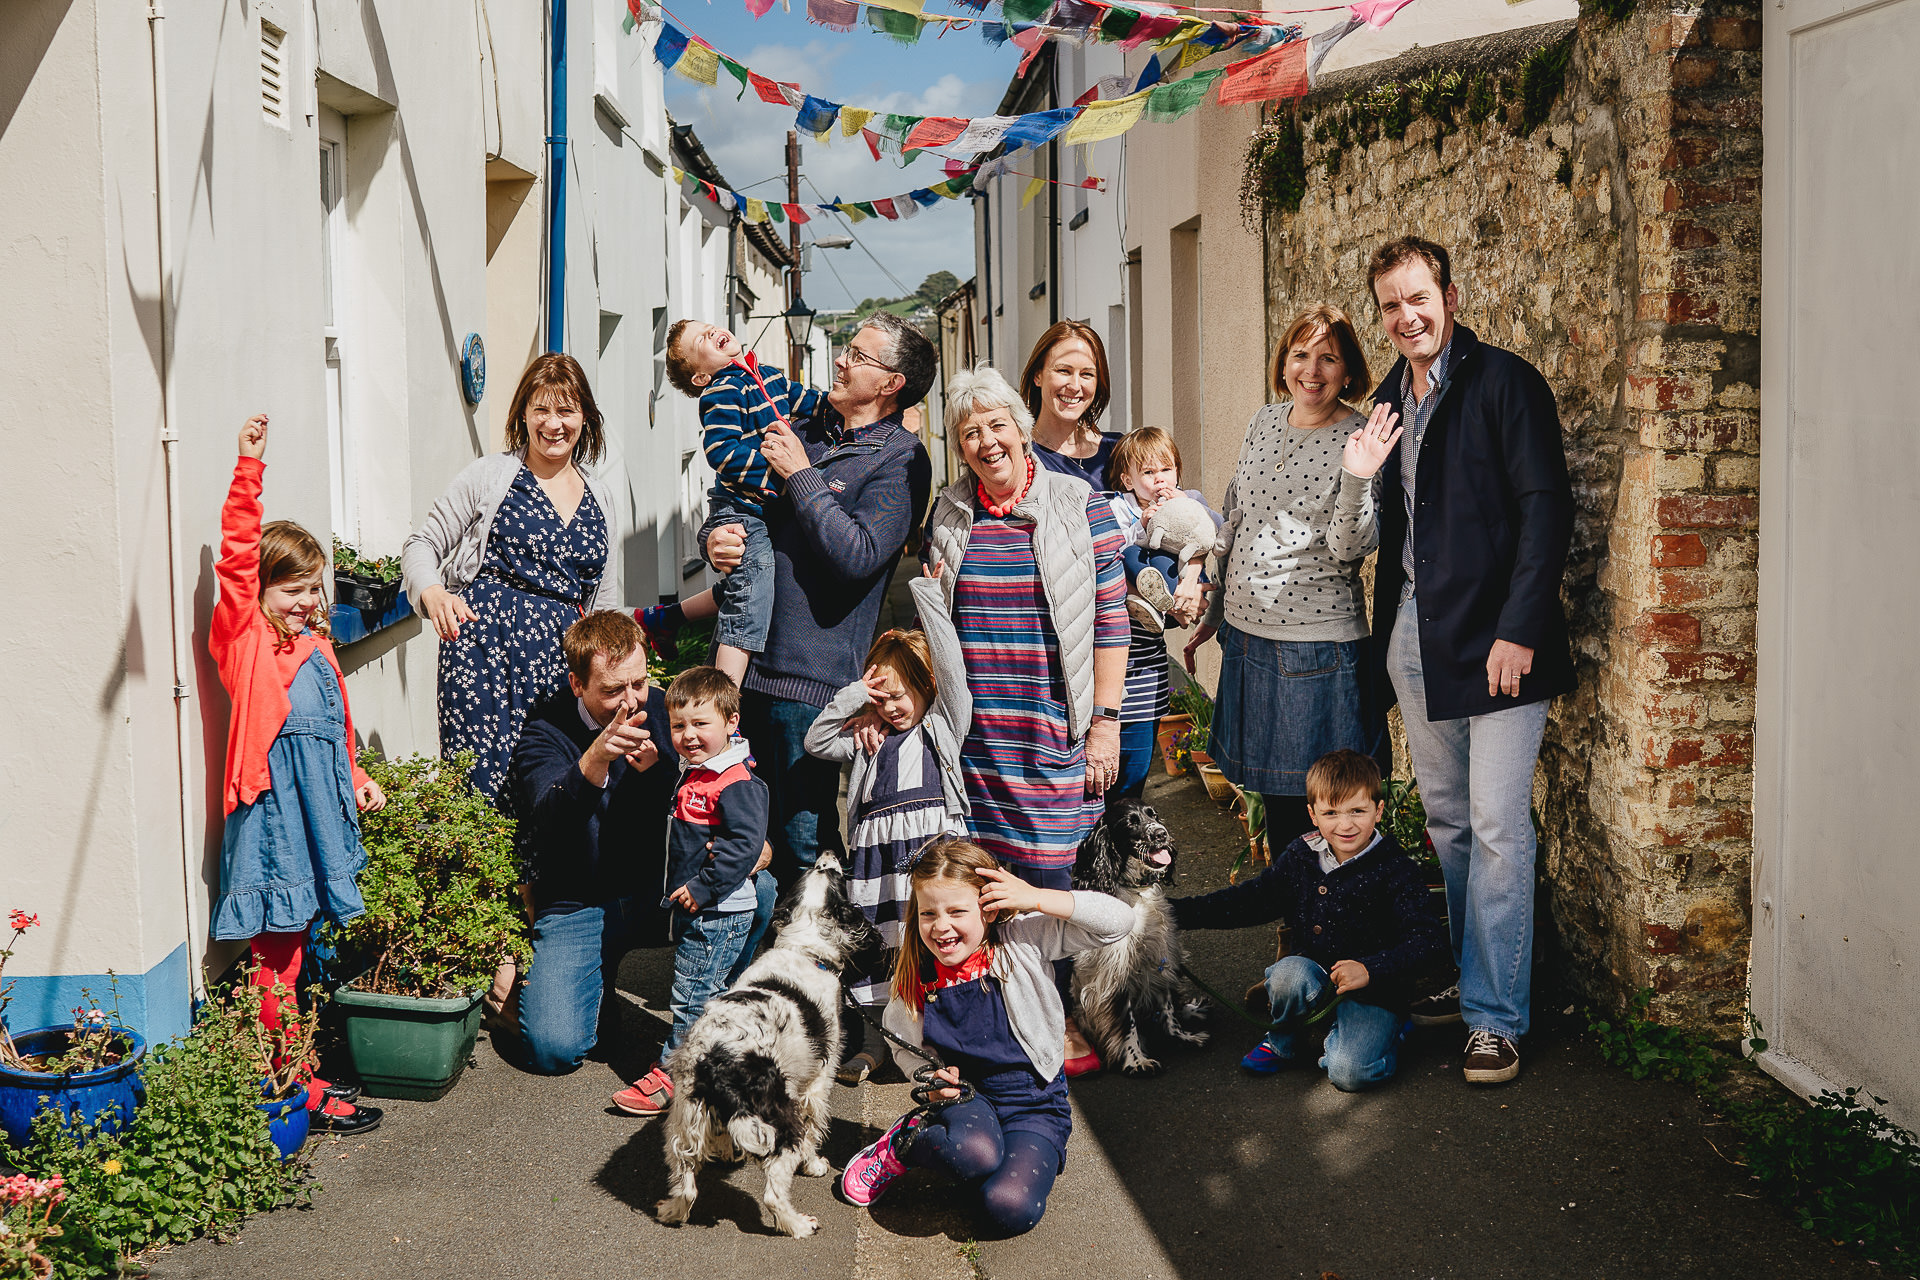 A relaxed family group photograph in a street covered by bunting